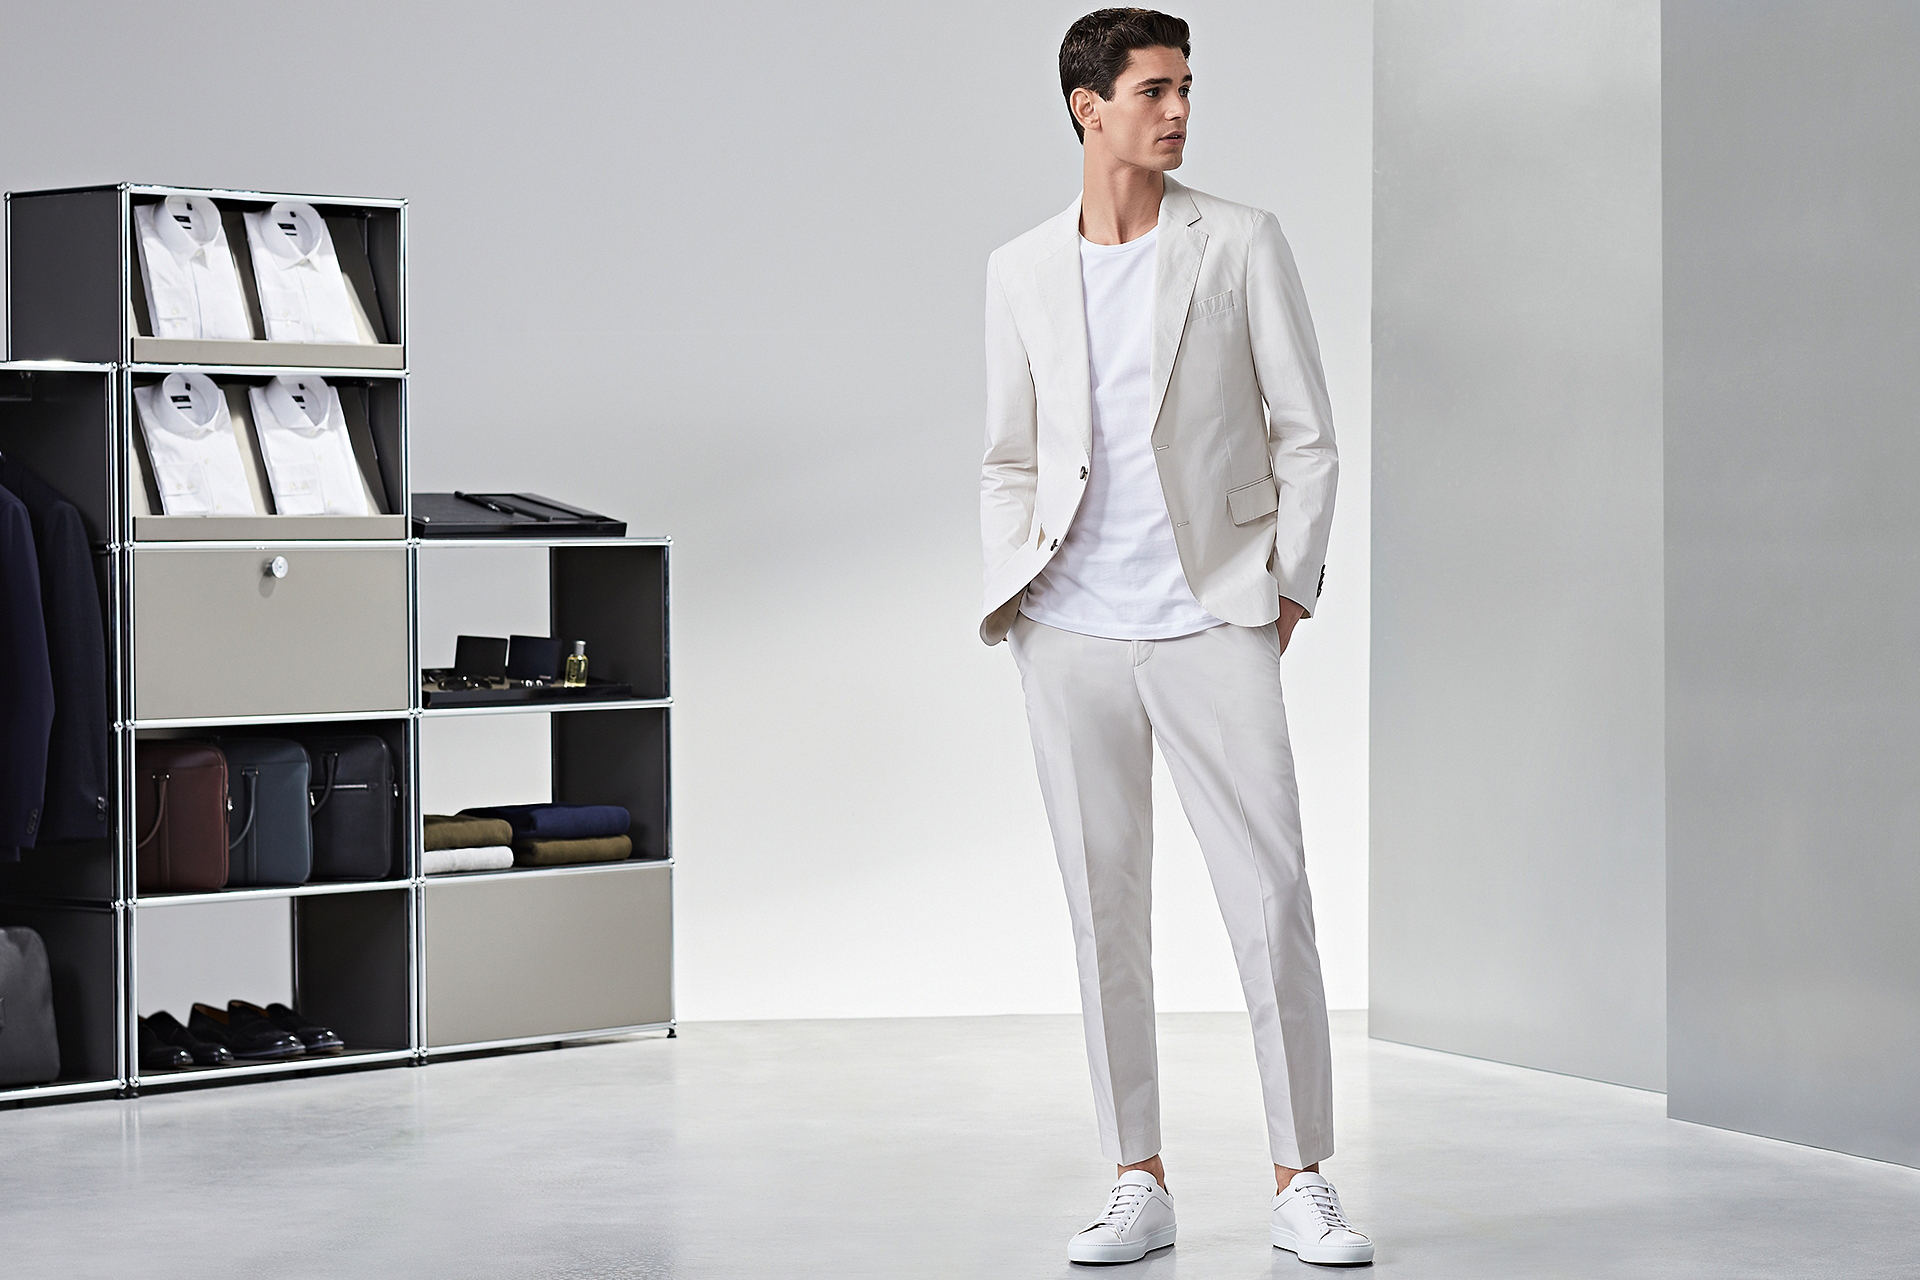 How to Wear Sneakers With a Suit: 9 Ways